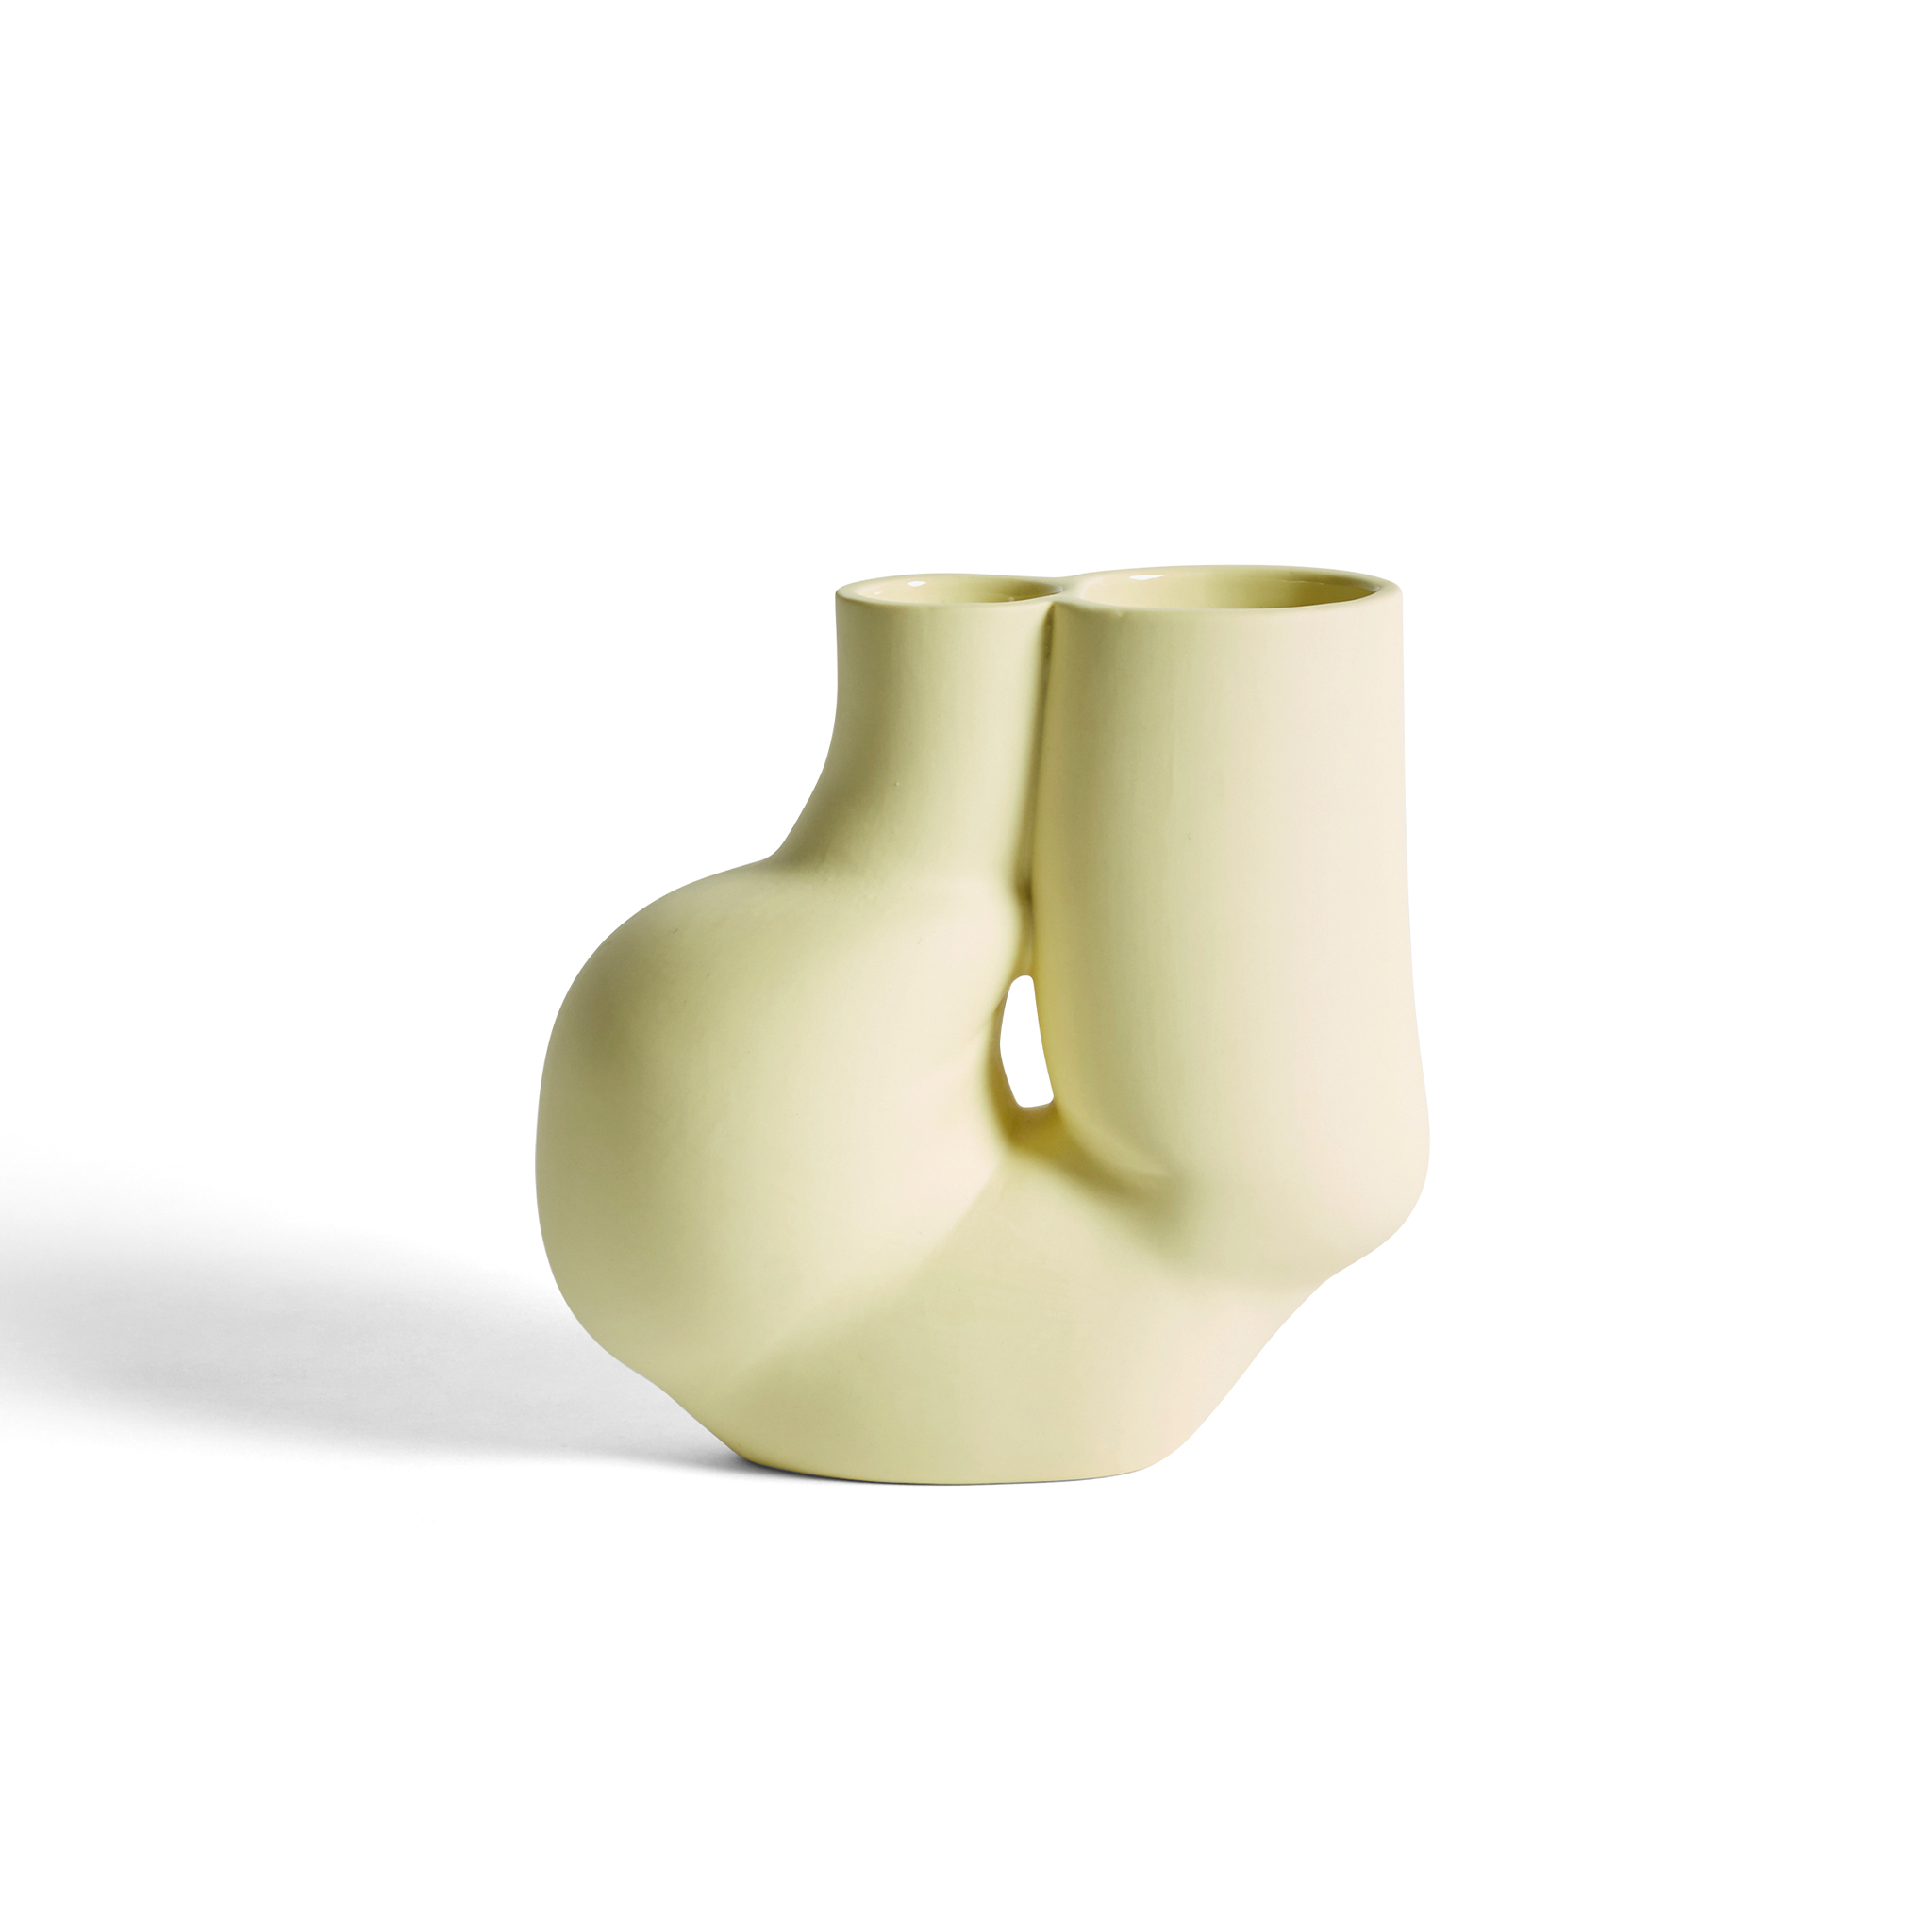 W&S Vases by Wang & Söderström for Hay